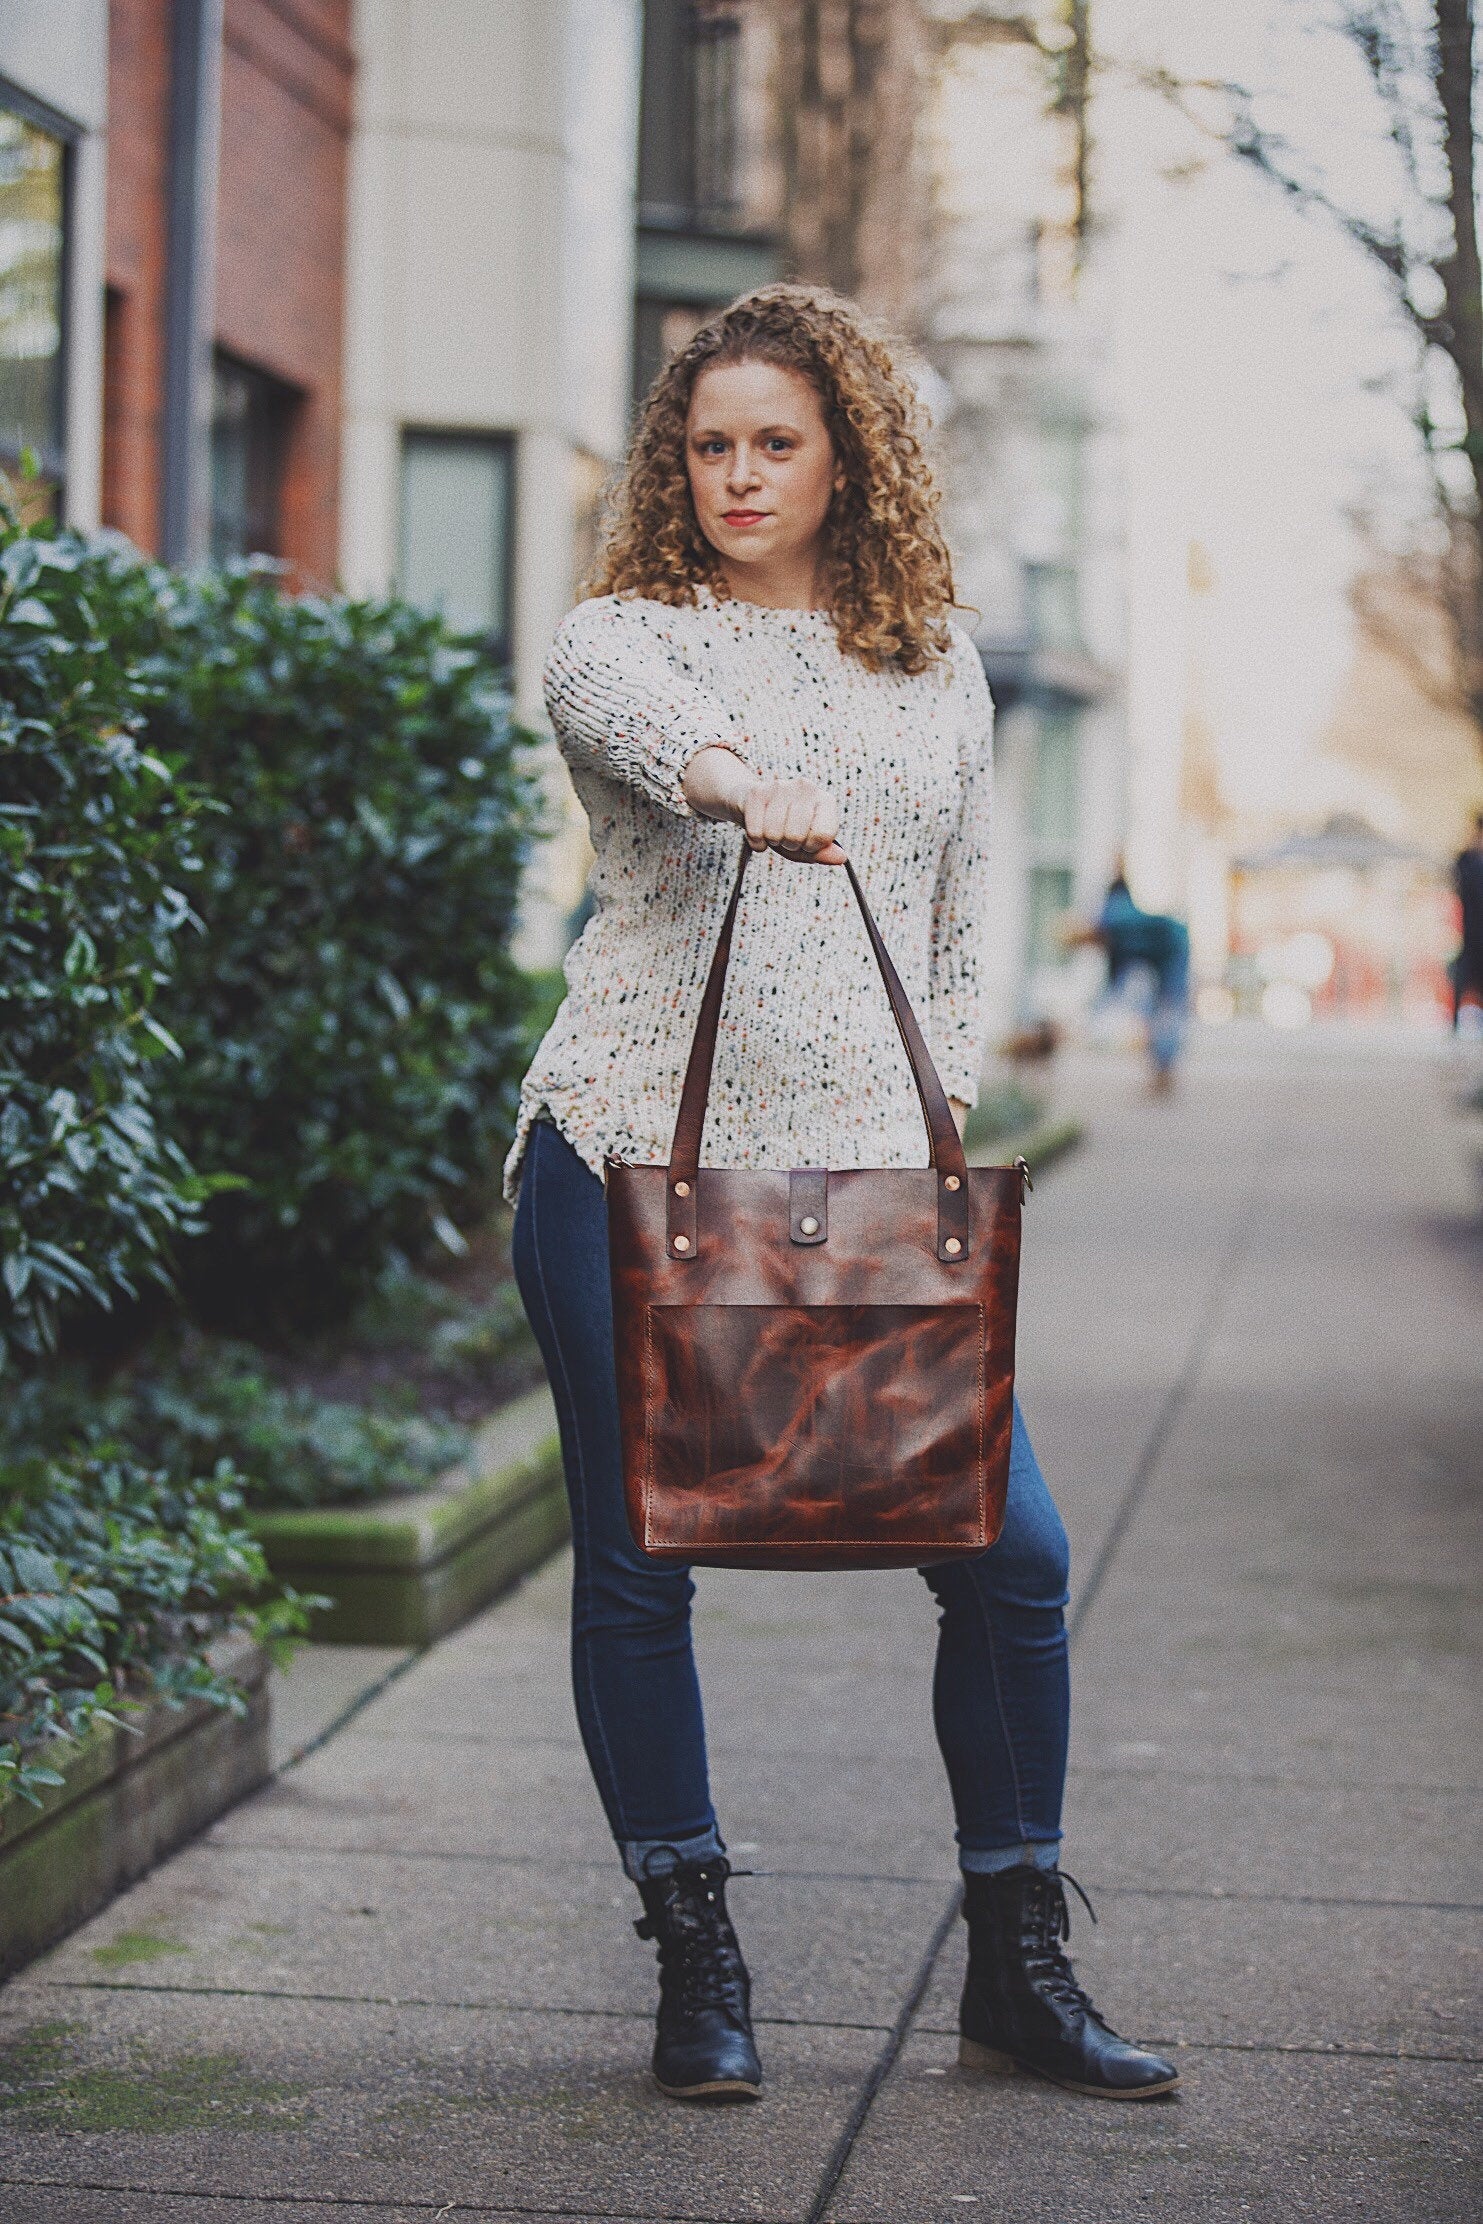 The Prairie. Handcrafted Classic Leather Tote Bag.